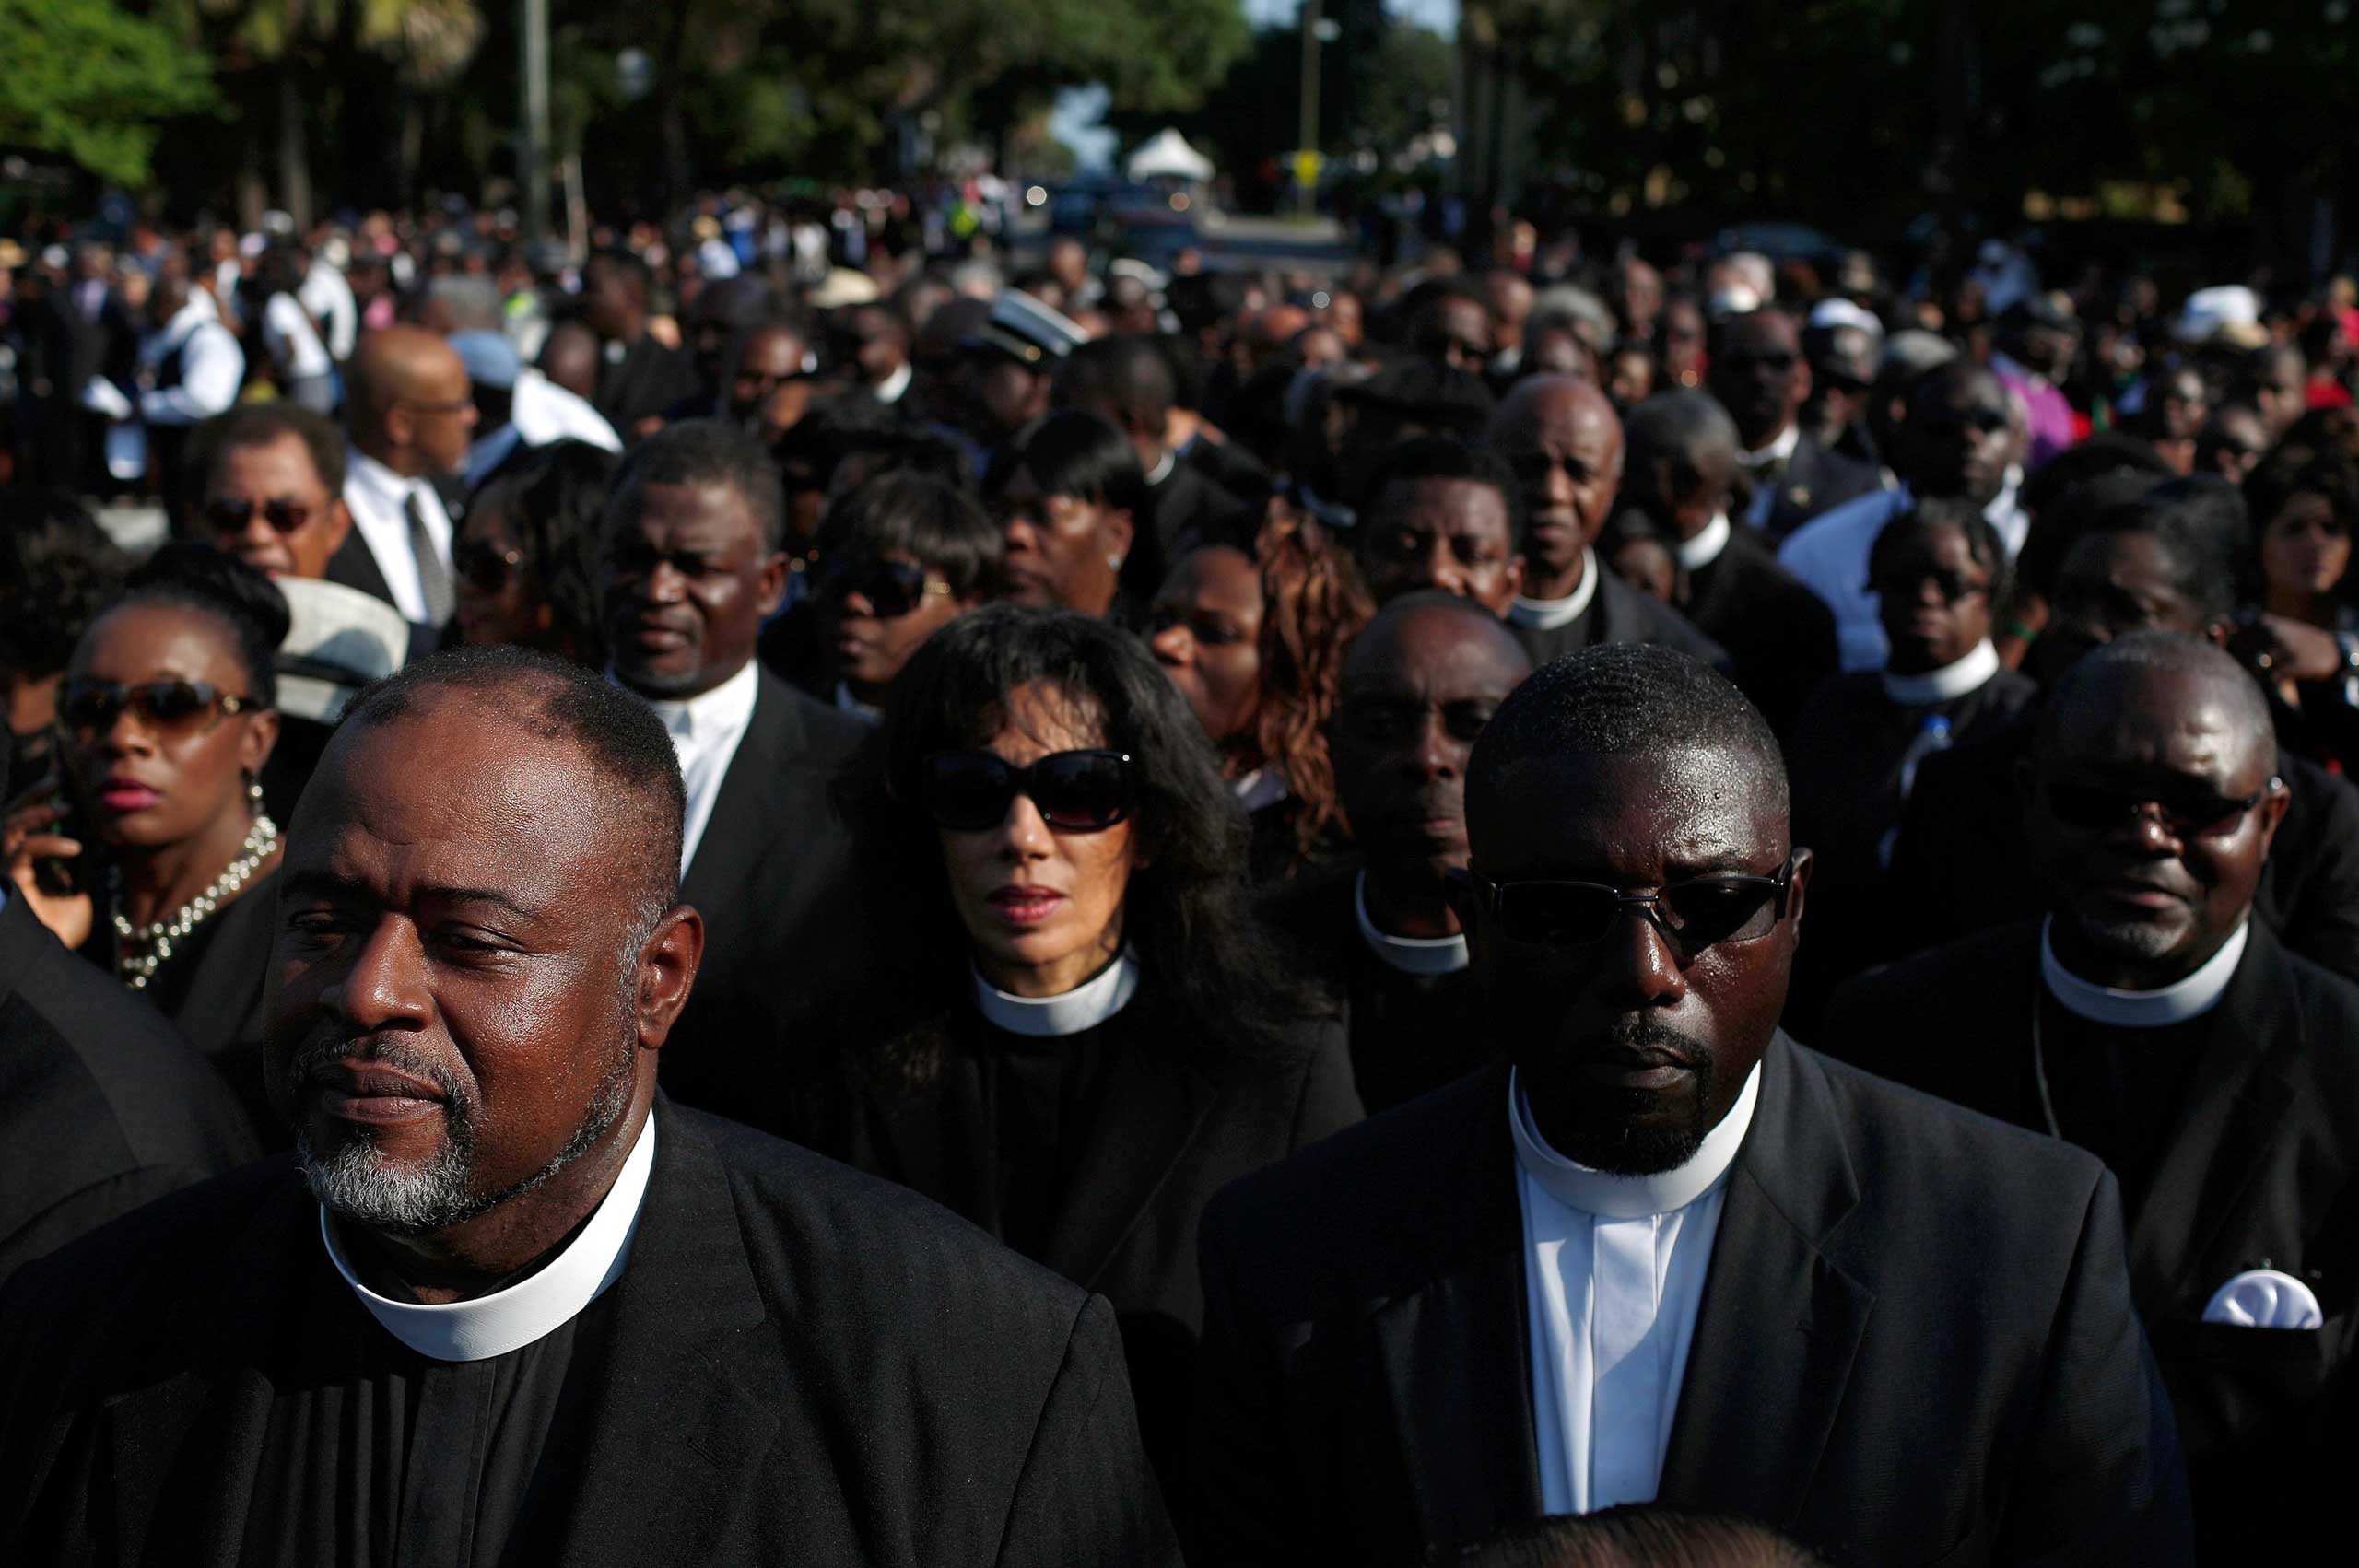 Members of the clergy wait to enter the funeral service for Rev. Clementa Pinckney in Charleston, S.C. on June 26, 2015.